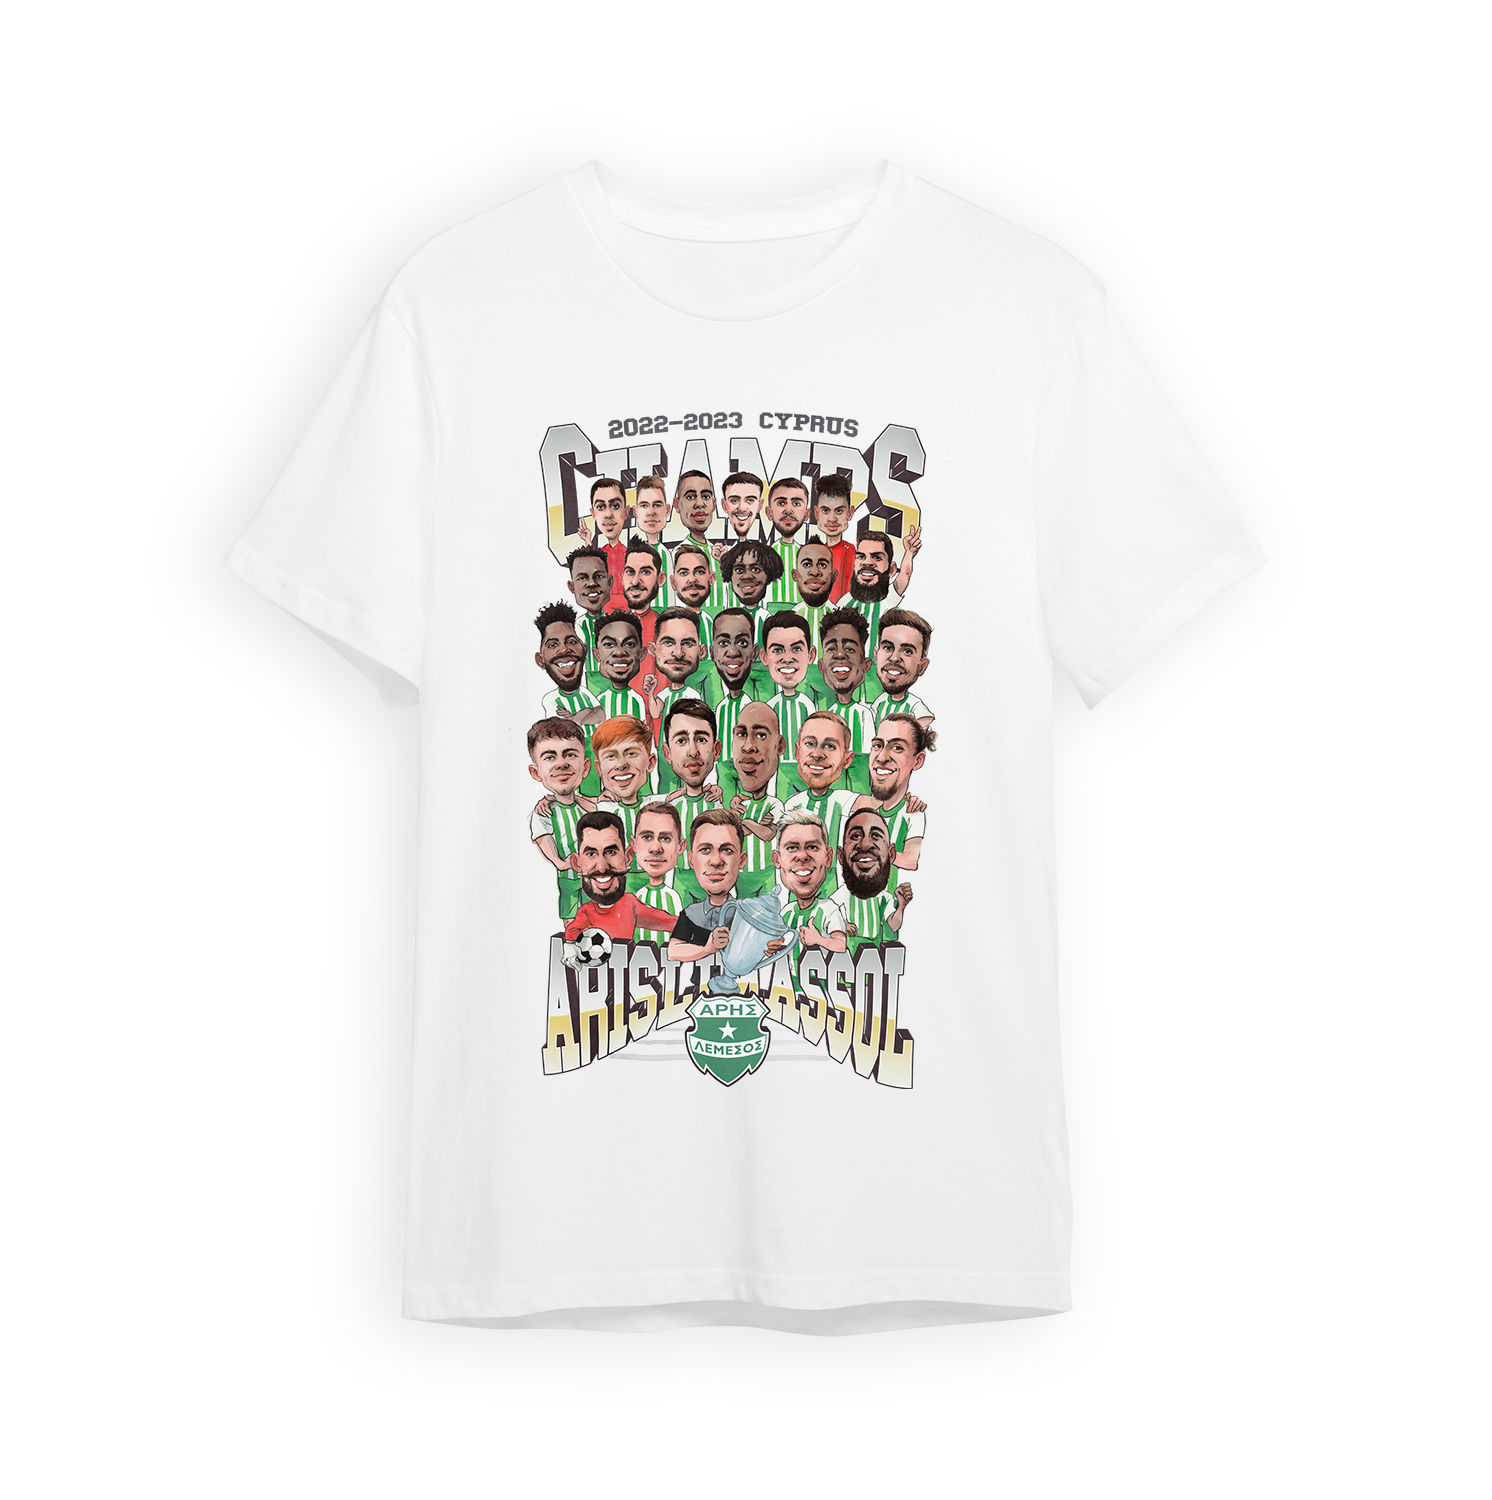 Champions collage T-SHIRT 2022/23 